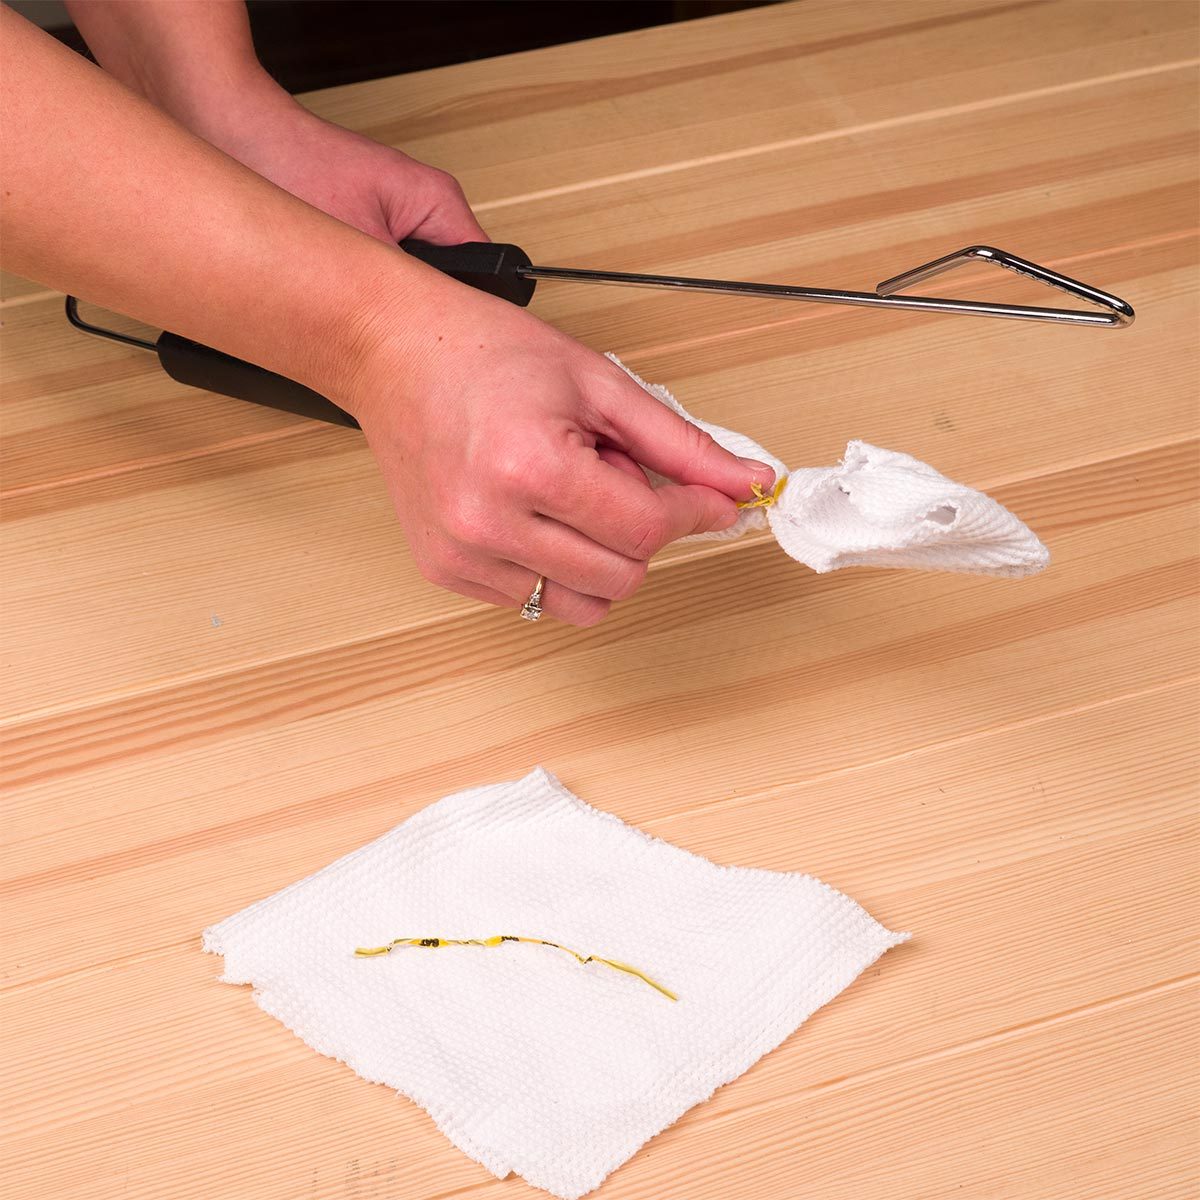 Use Tongs to Clean Blinds